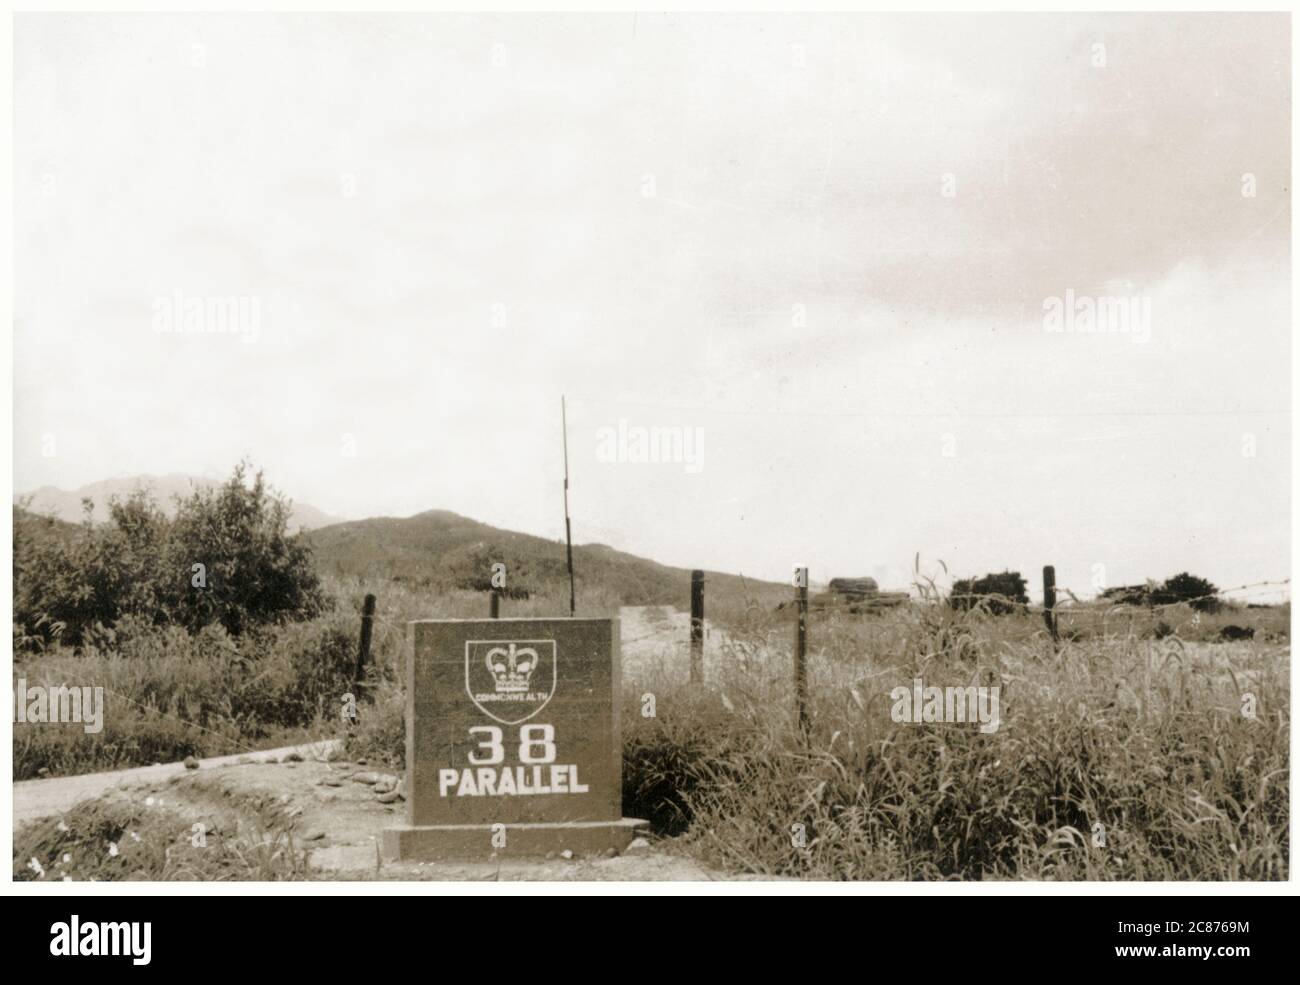 Korean War era - Commonwealth Sign - The 38th parallel north, which formed the border between North and South Korea prior to the Korean War. Stock Photo